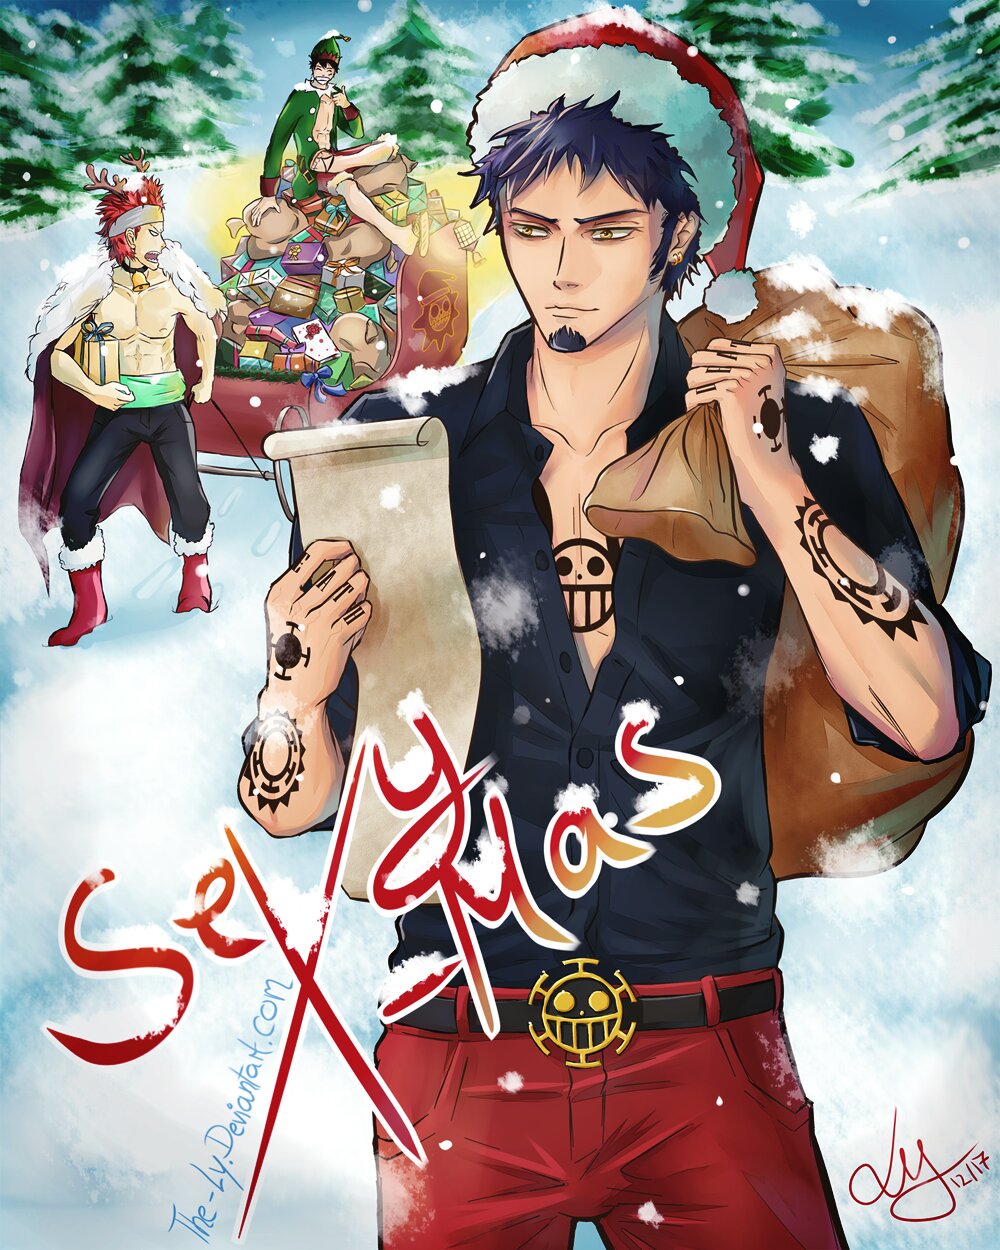 Pirate Heartbeat Dokomi F Since I Can T Finish A Christmas Artwork This Year Here S Last Year S Sexy Santa Trafalgarlaw Eustasskid Monkeydluffy Onepiece トラファルガー D ワーテル ロー トラファルガー